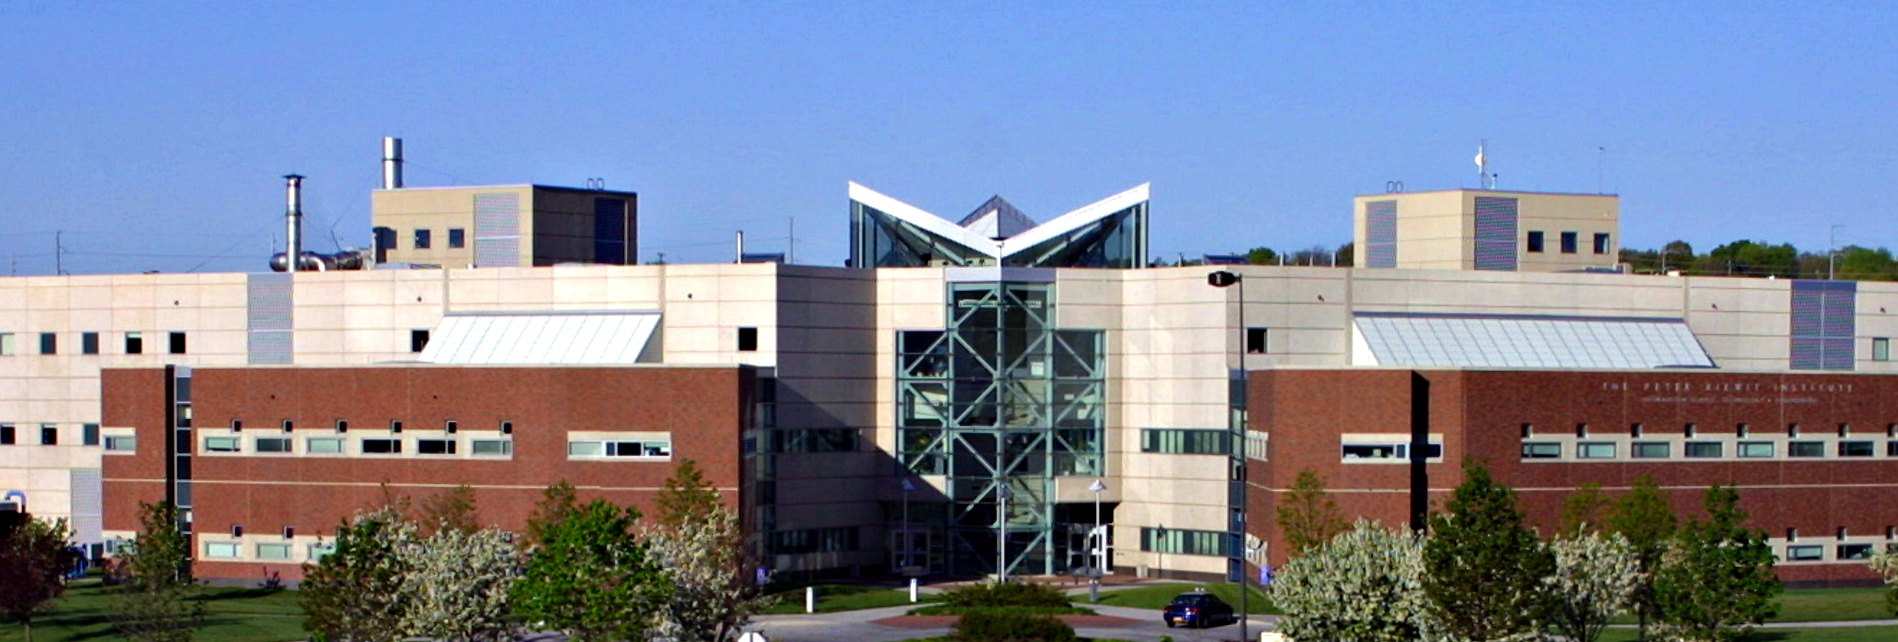 The principal investigators on both projects work in the Peter Kiewit Institute.